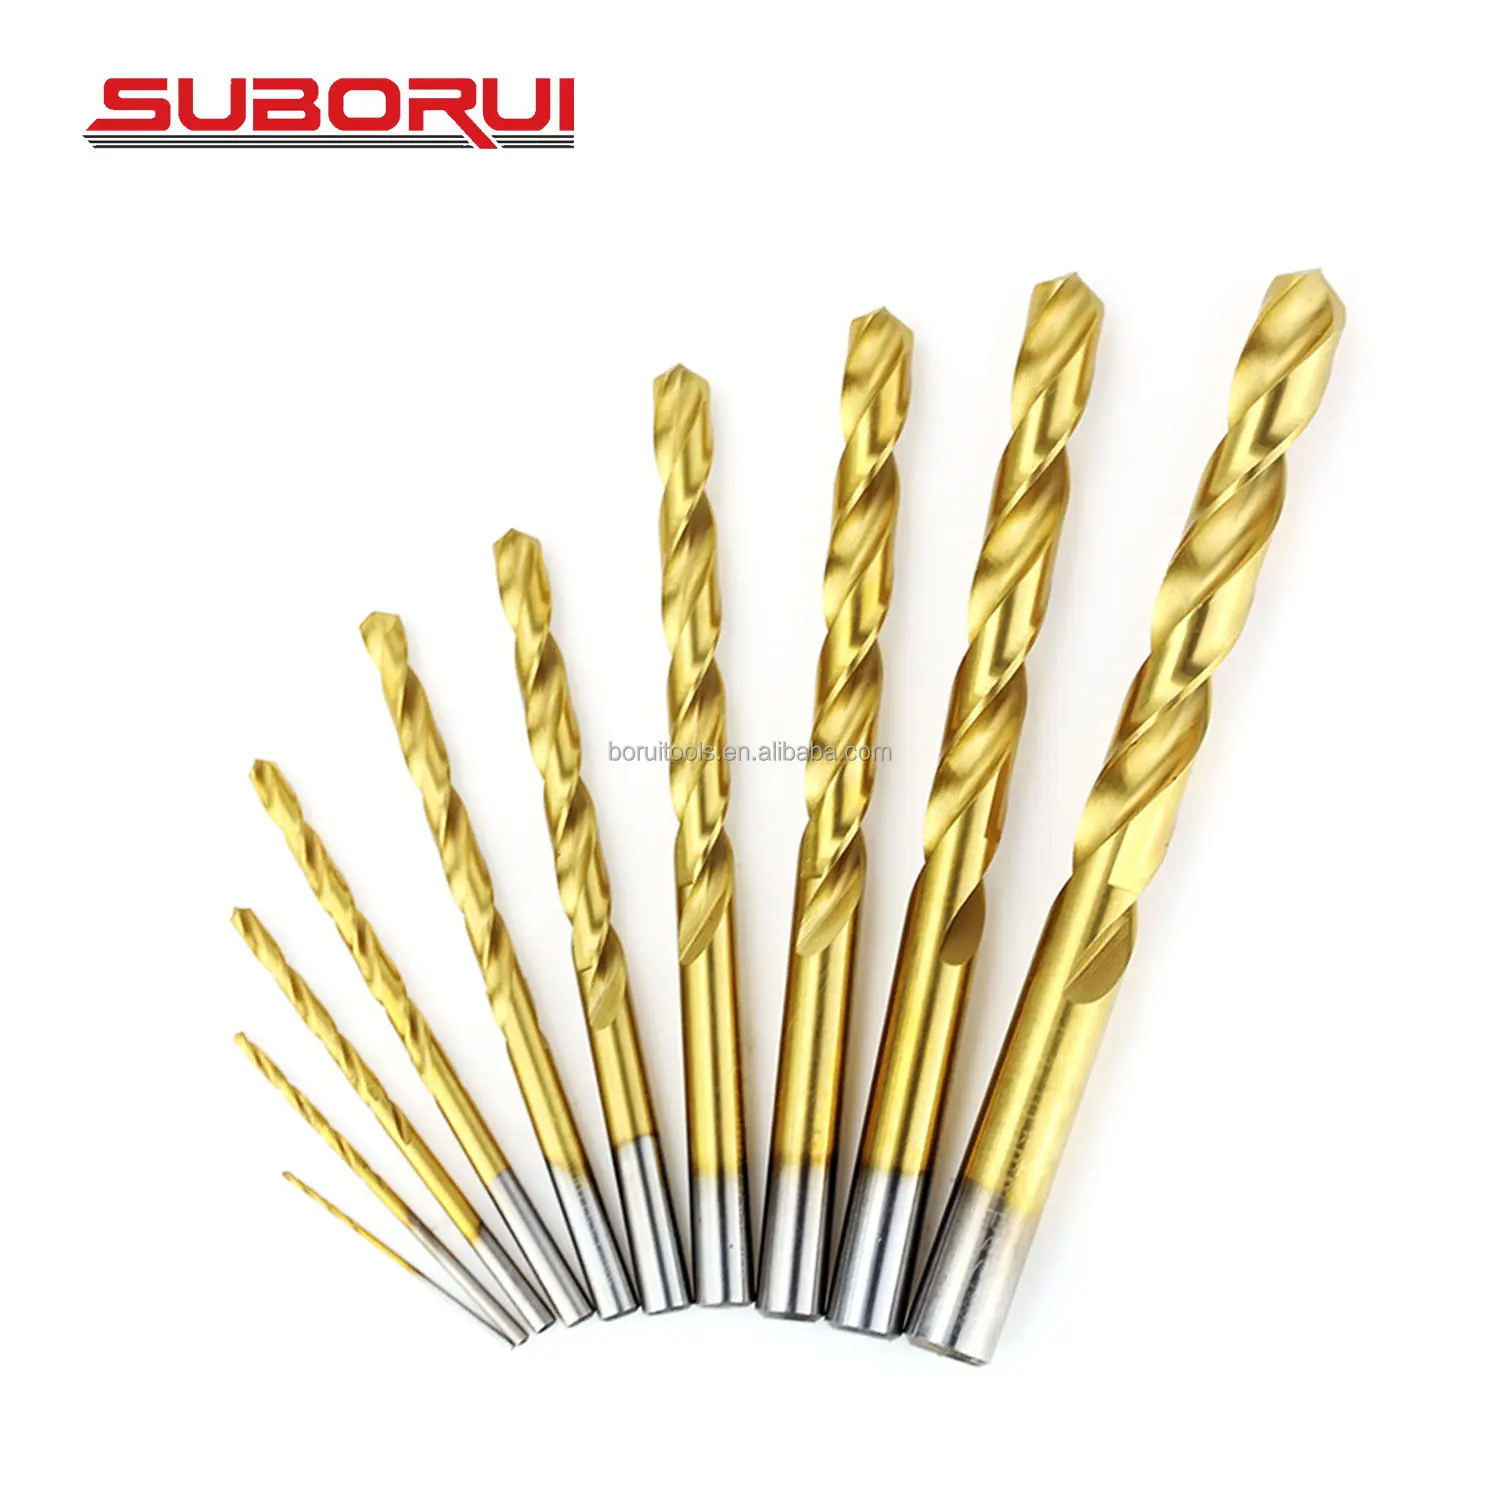 SOBORUI Hss 6542 M2 118 Degree Fully Ground Titanium Coated Broca Bohrer para metal Twist Drill Bits For Stainless Steel